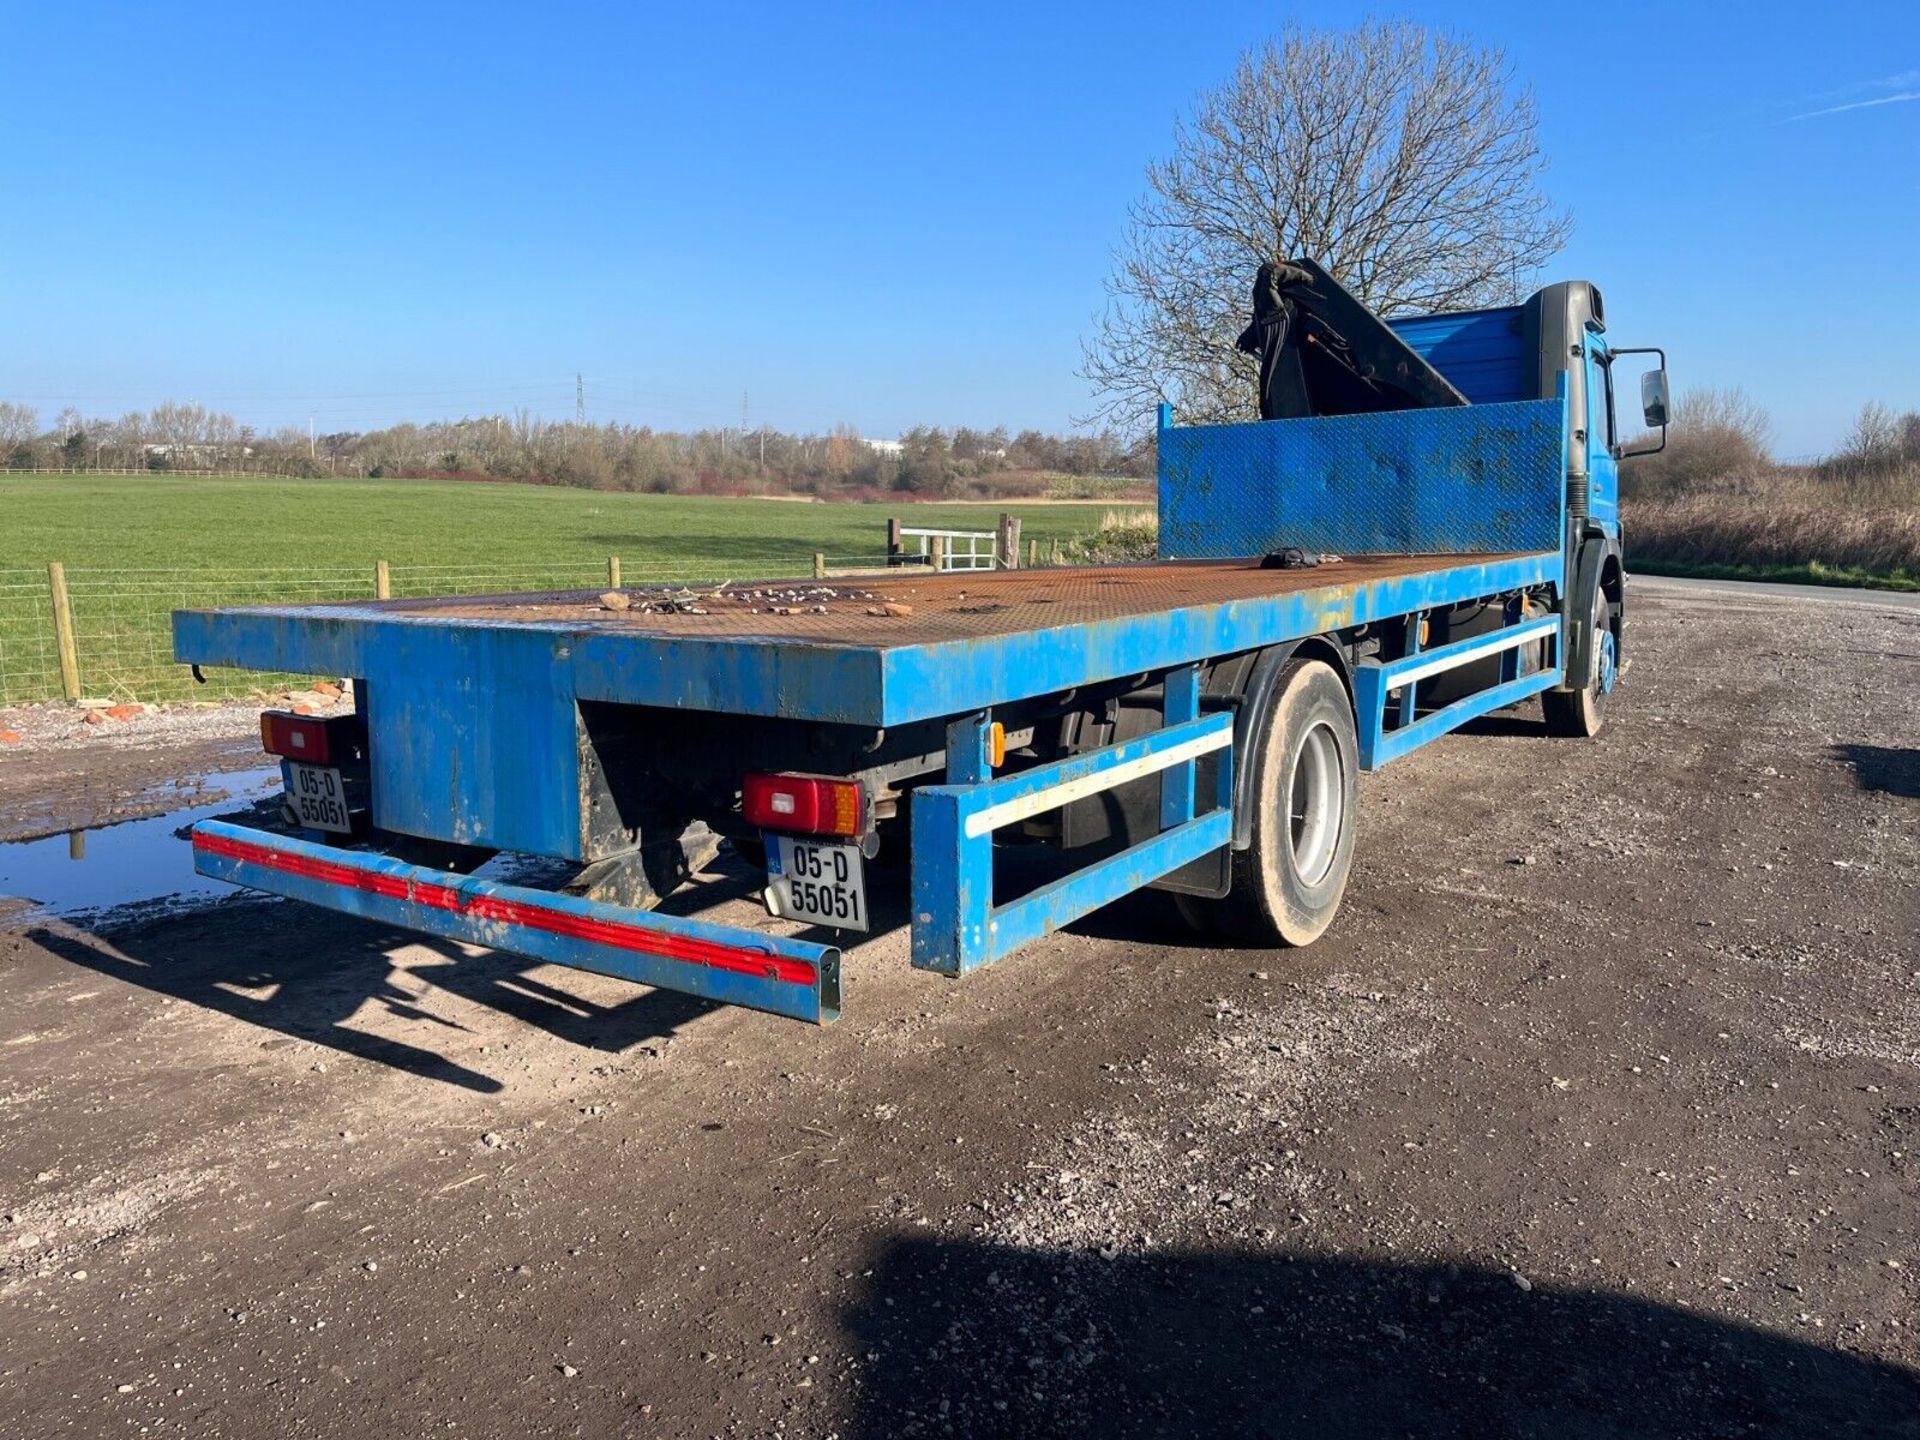 2005 MERCEDES AXOR 4 X 2 FLATBED WITH PALFINGER CRANE - Image 3 of 14